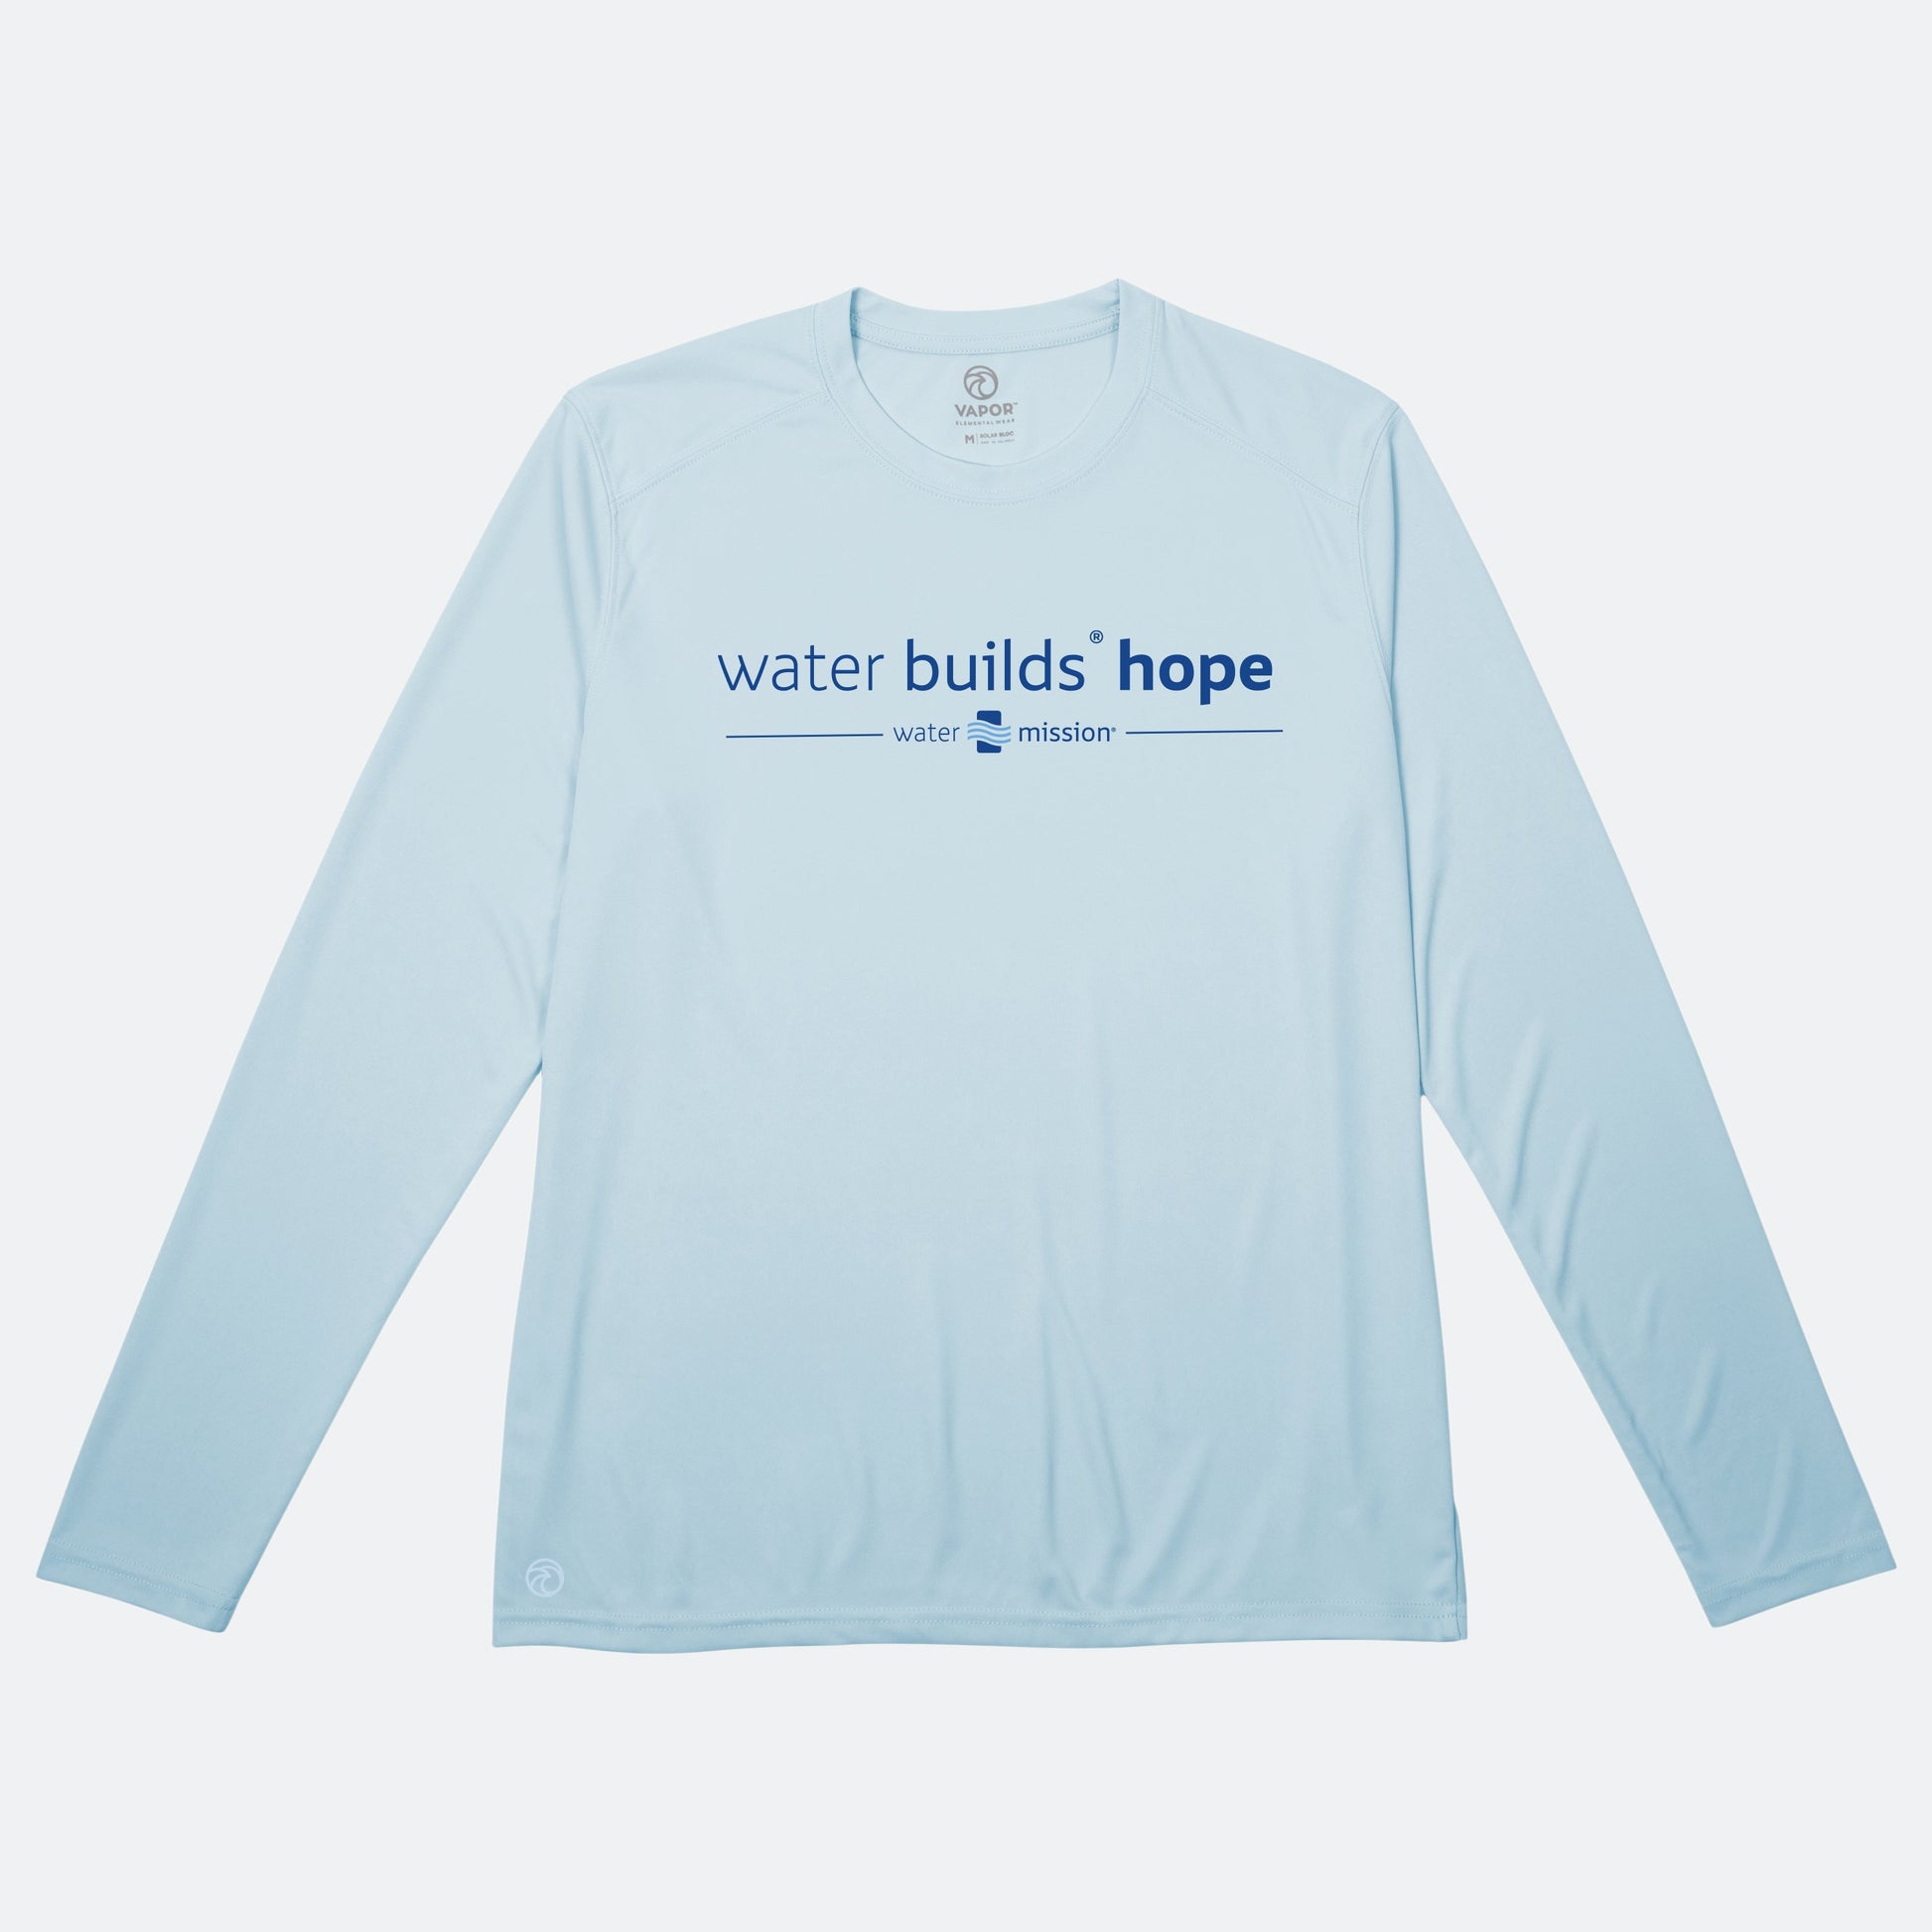 Vapor Apparel Sun Protection Men's Water Mission Hope Eco Sol Long Sleeve